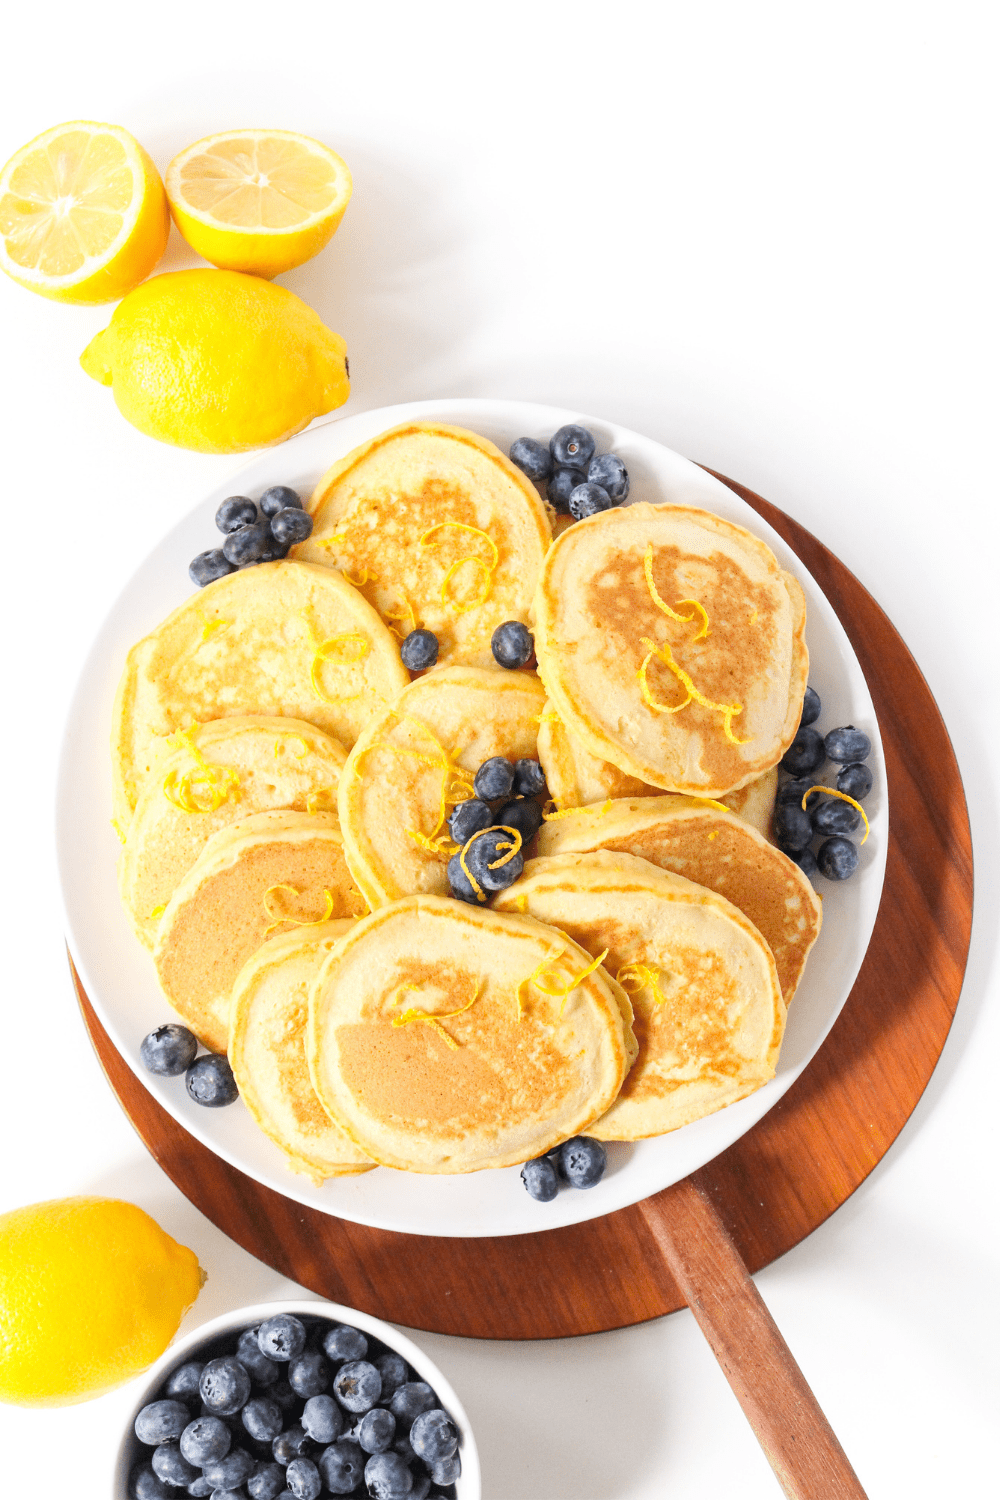 lemon pancakes with ricotta spread out on a plate, with lemon slices and a bowl of blueberries beside it